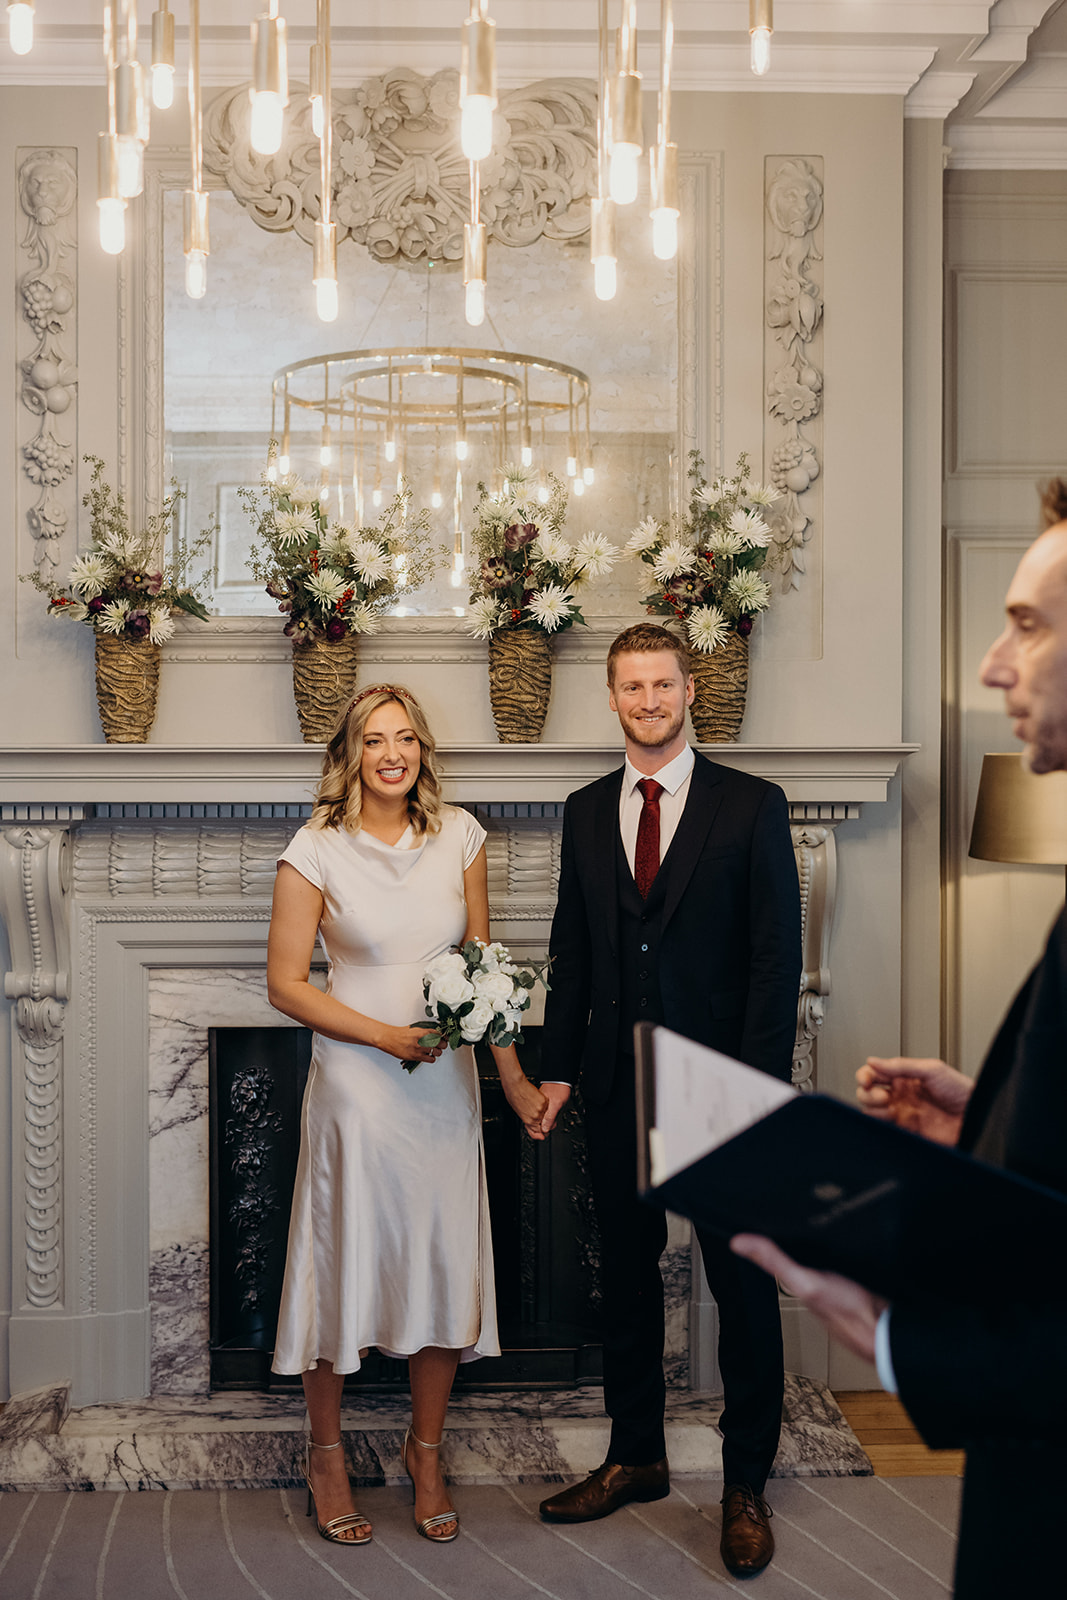 Vows in Soho Room at Old Marylebone Town Hall